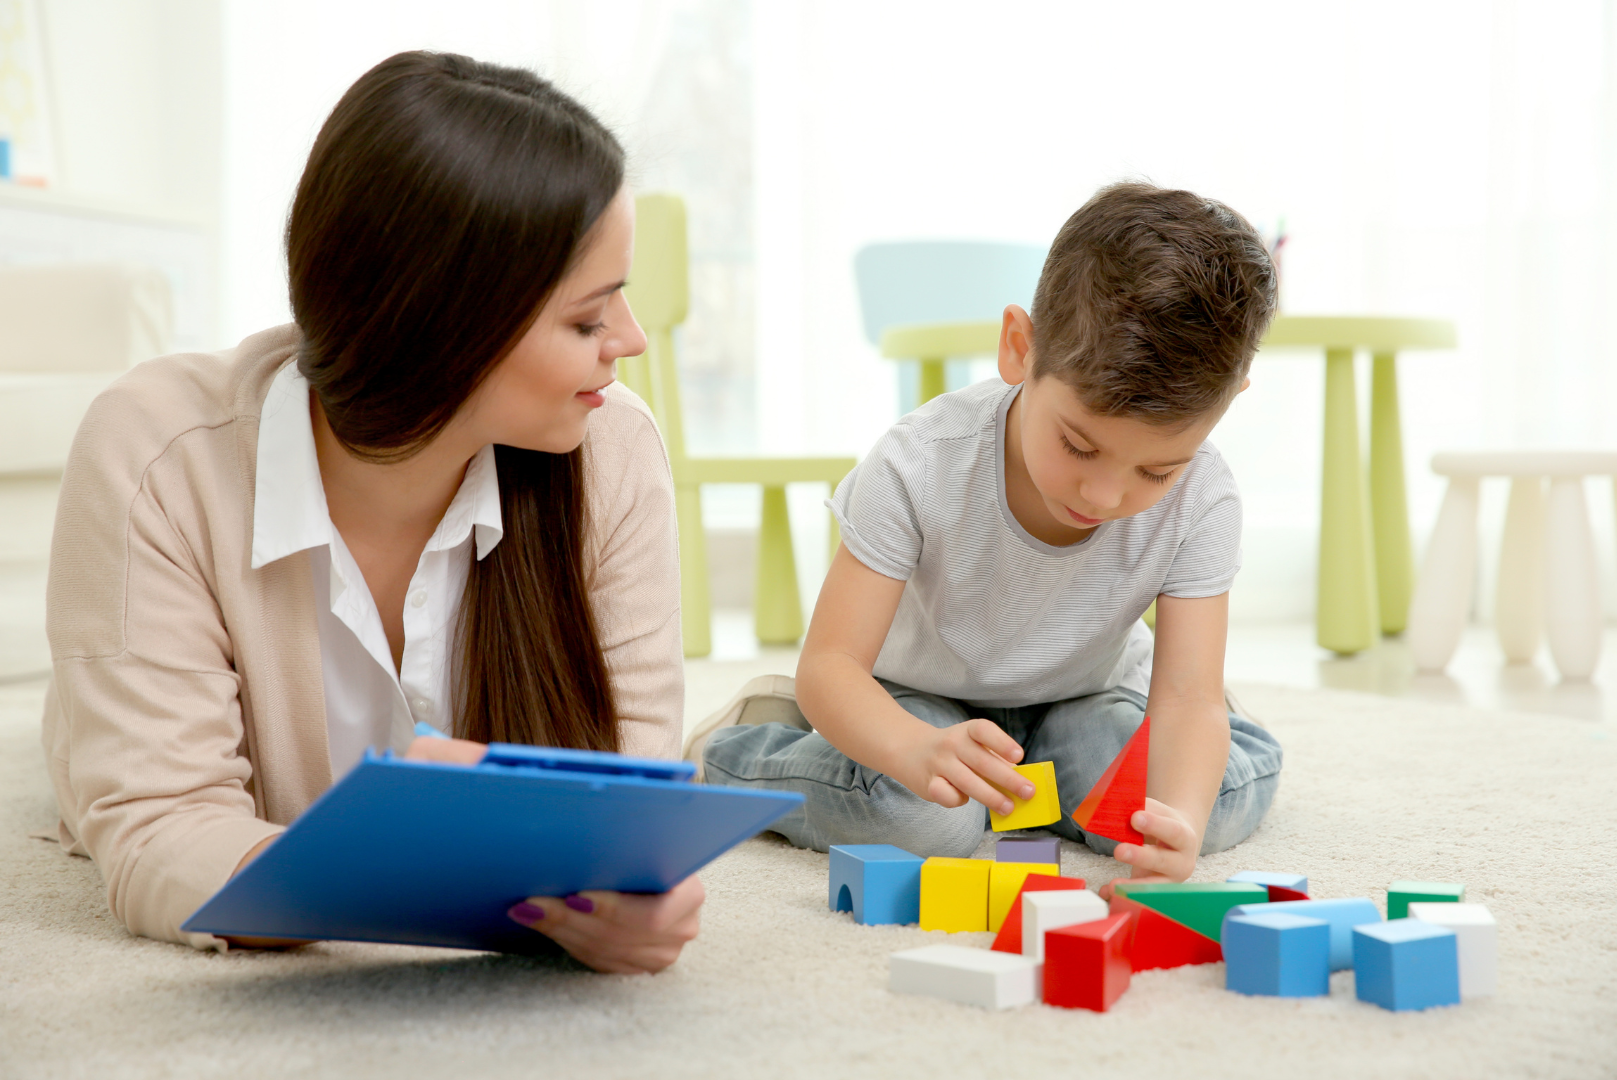 10 Tips to Improve Joint Attention Skills to Support Language Development